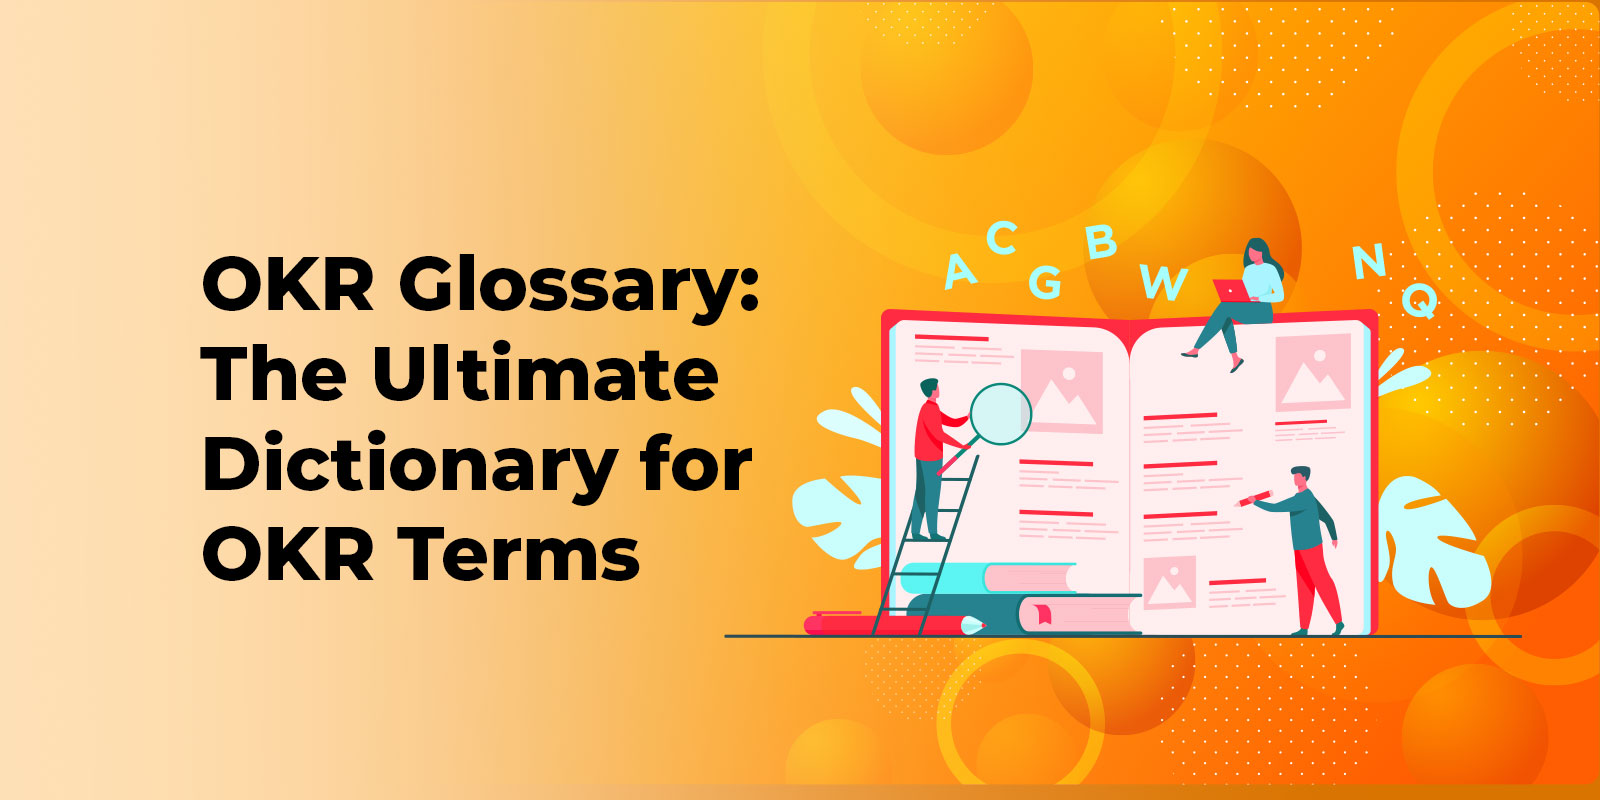 OKR Glossary: The Ultimate Dictionary for OKR Terms